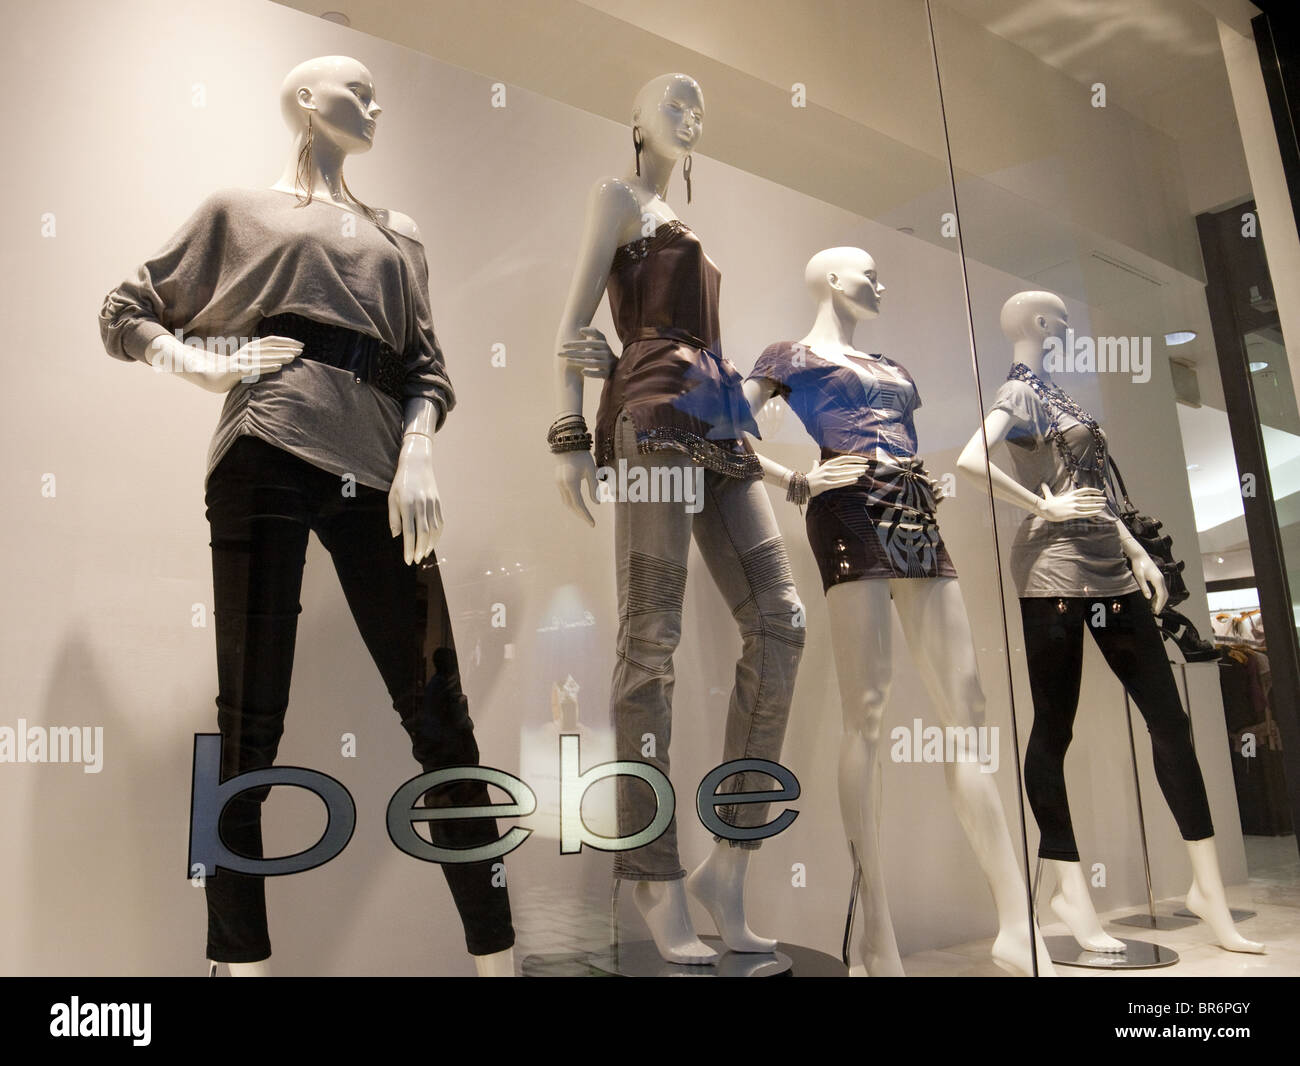 Bebe womens clothes and apparel store window, Las Vegas USA Stock Photo